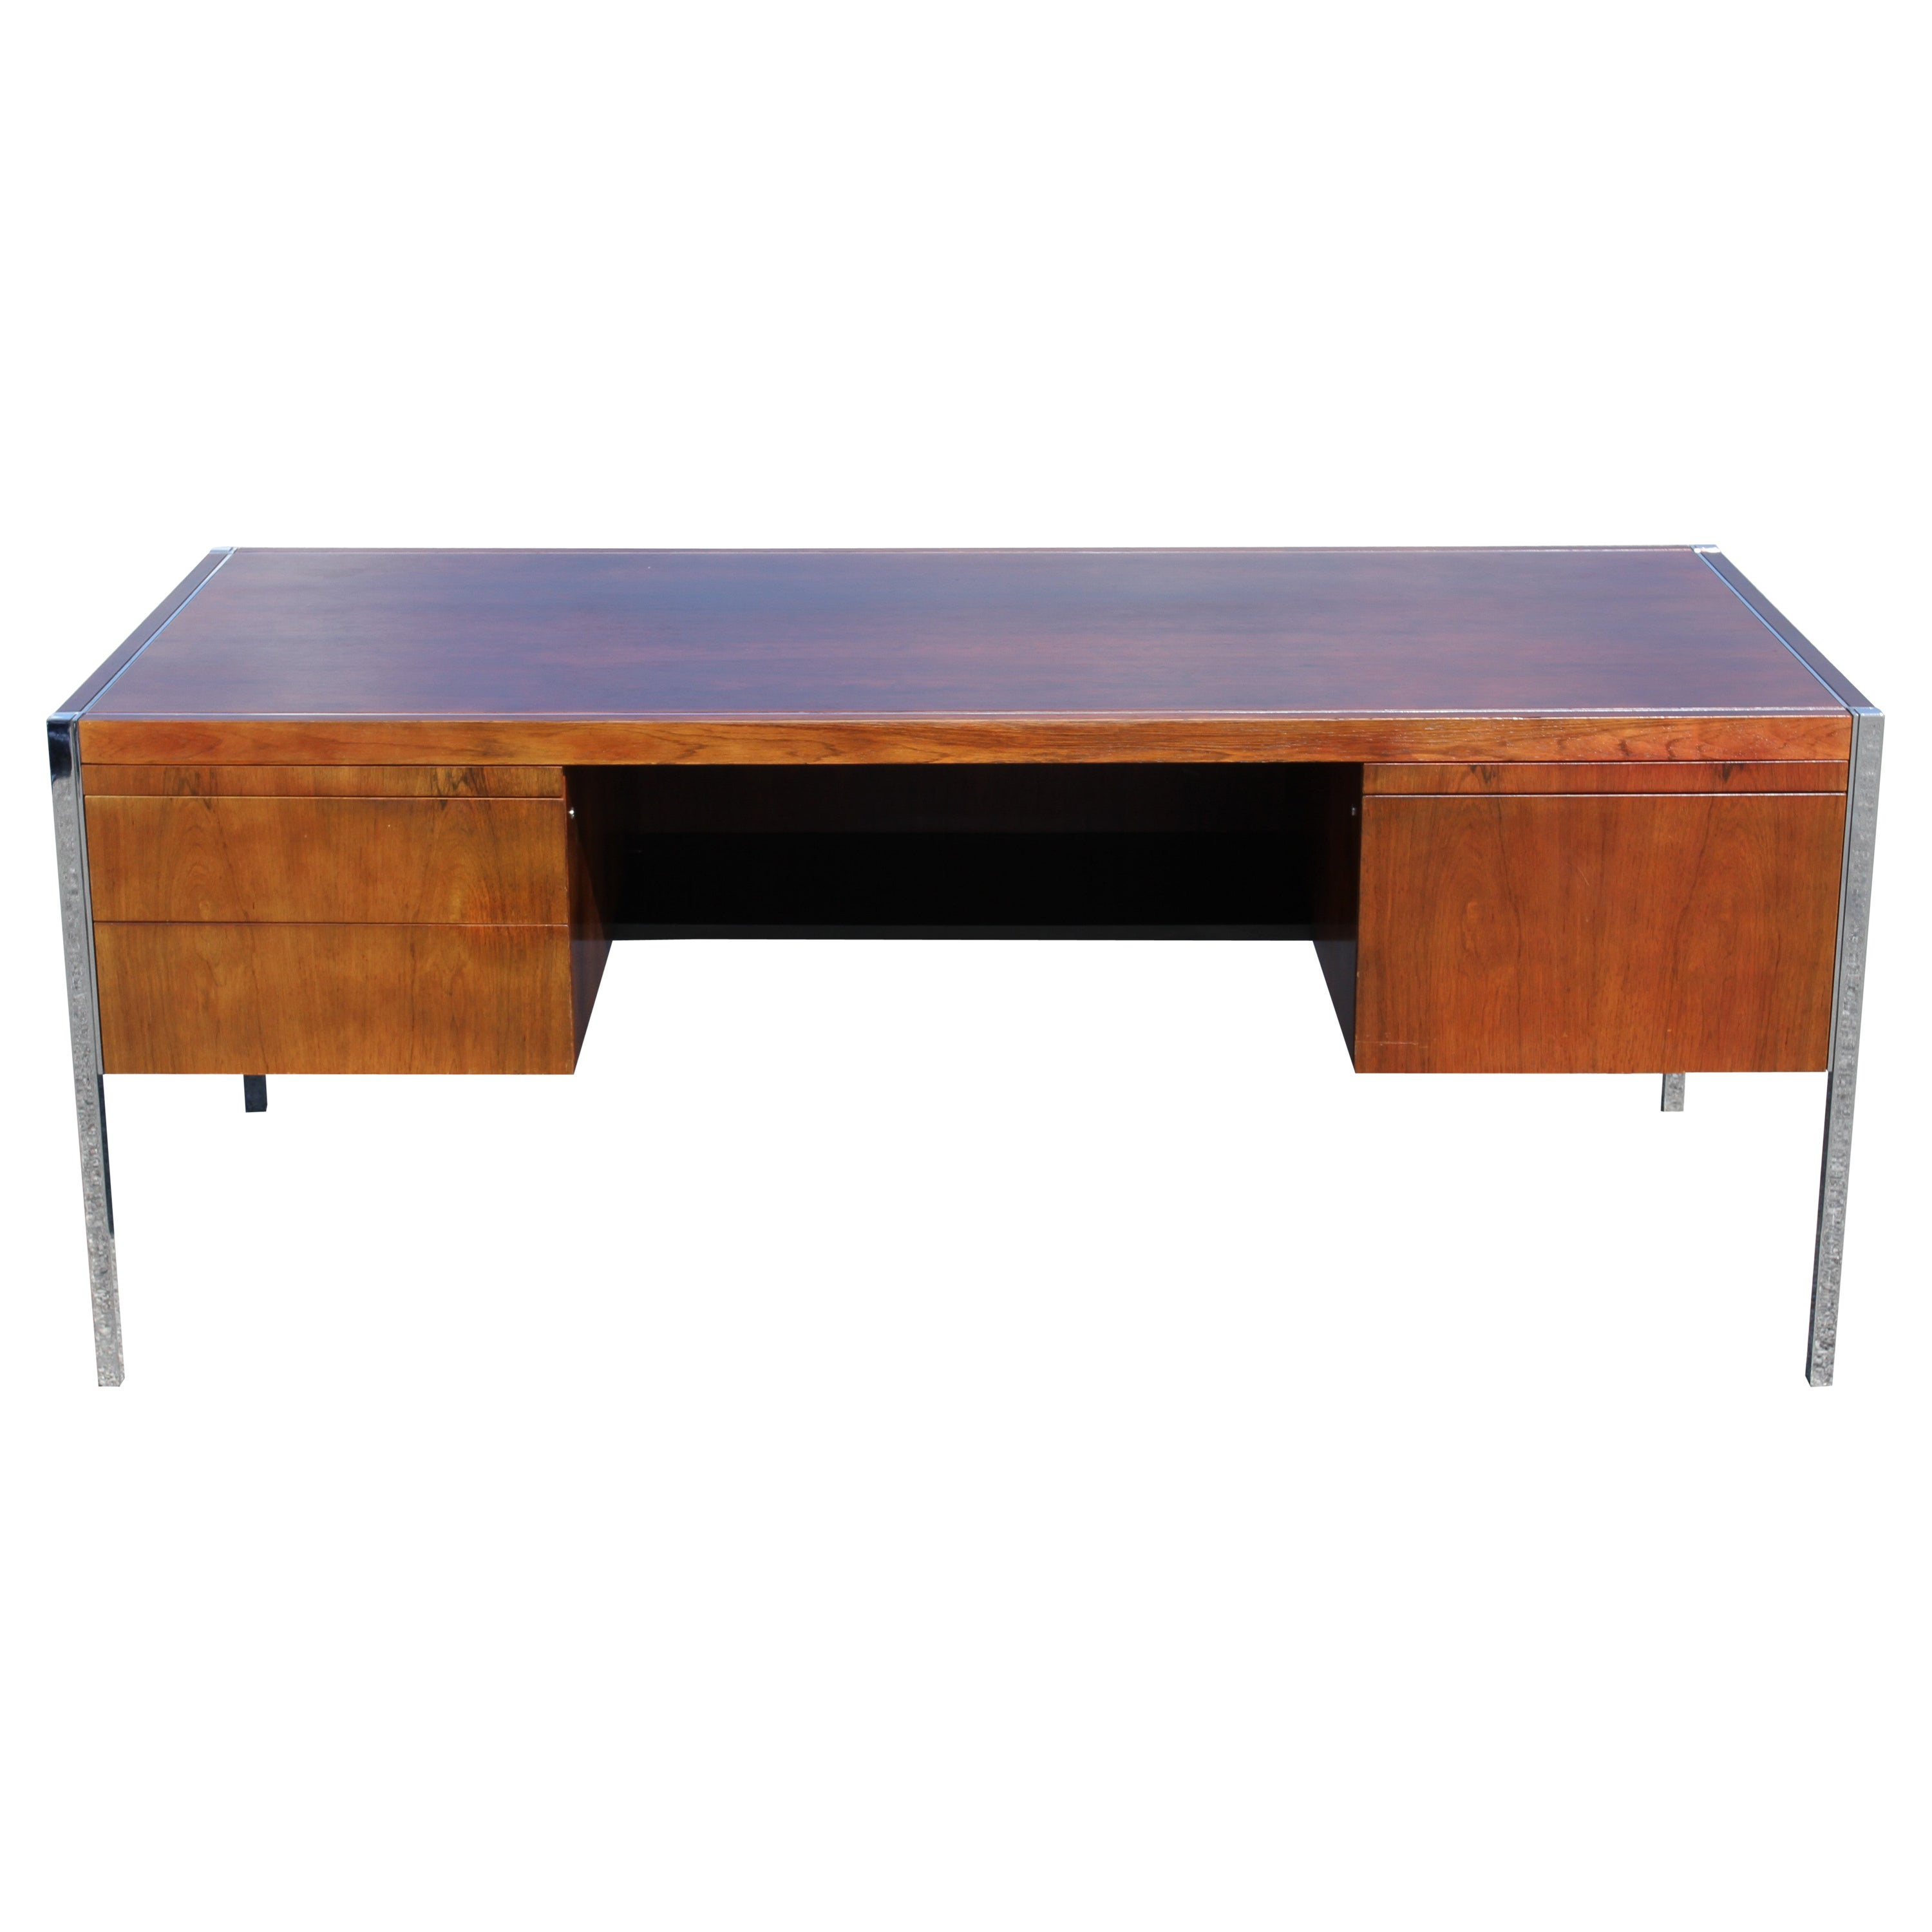 Richard Schultz for Knoll 1960s Mid-Century Modern Rosewood Executive Desk #4146 For Sale